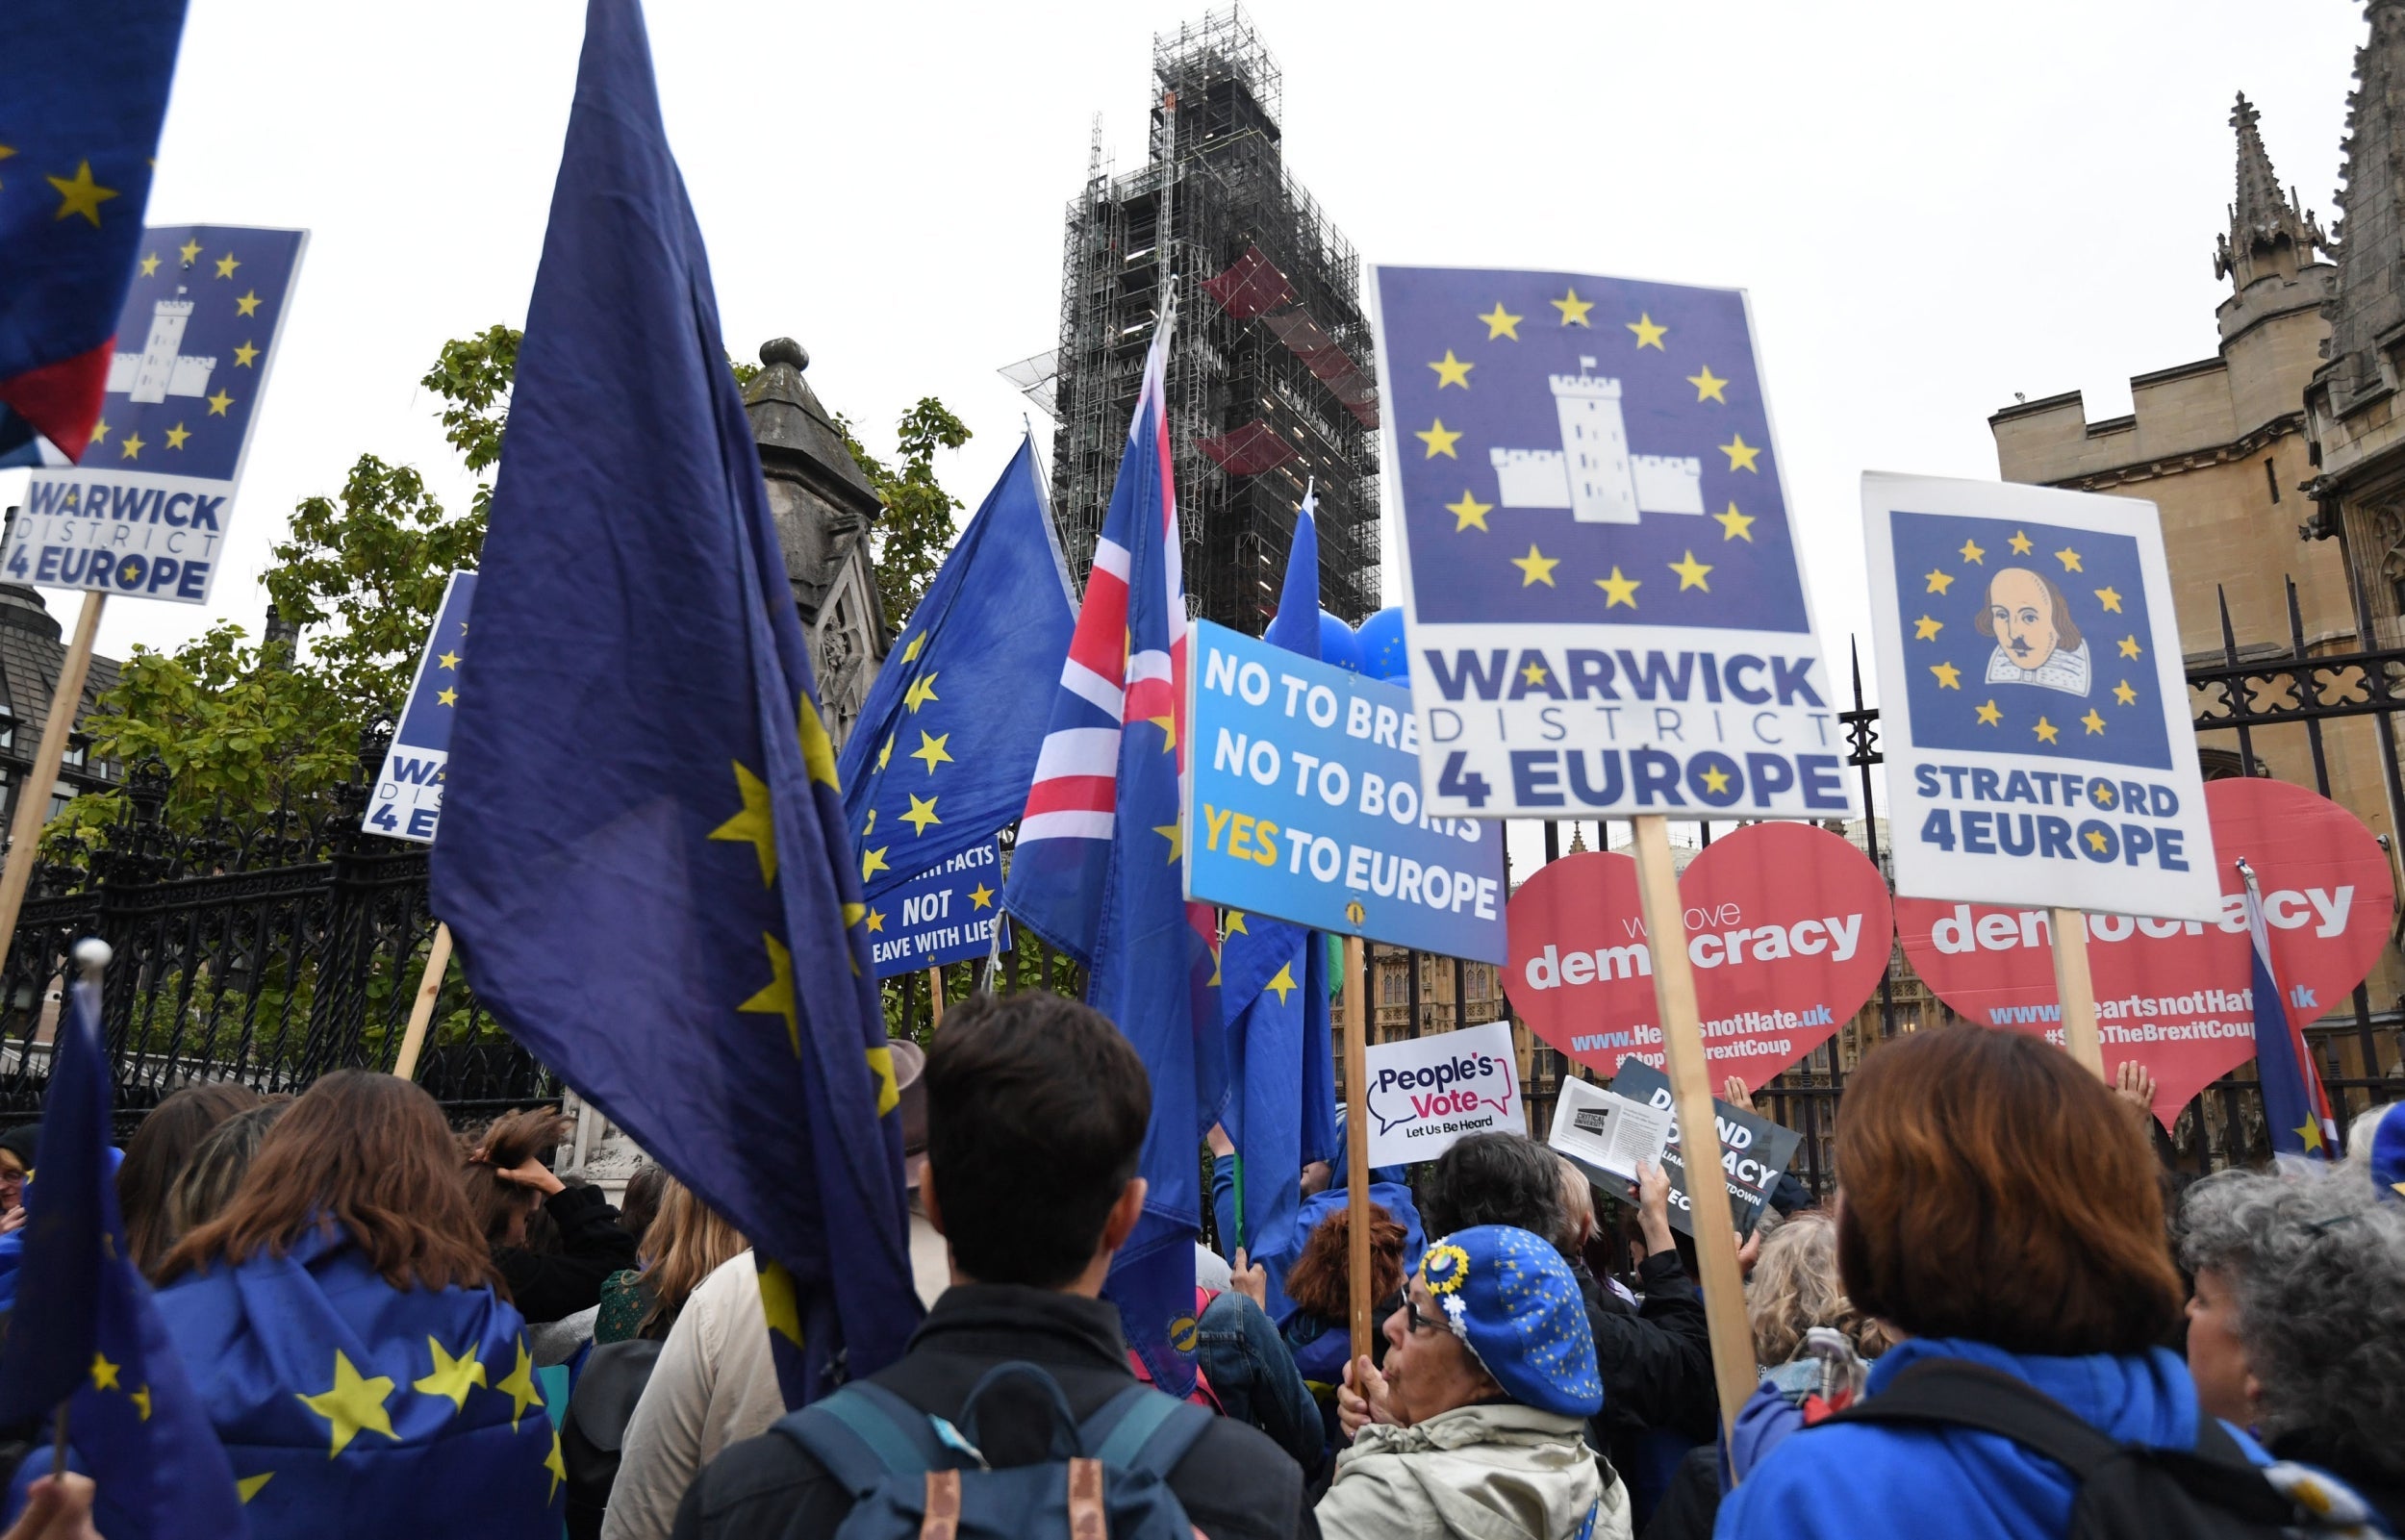 The Brexit debate has fired up passions on both sides